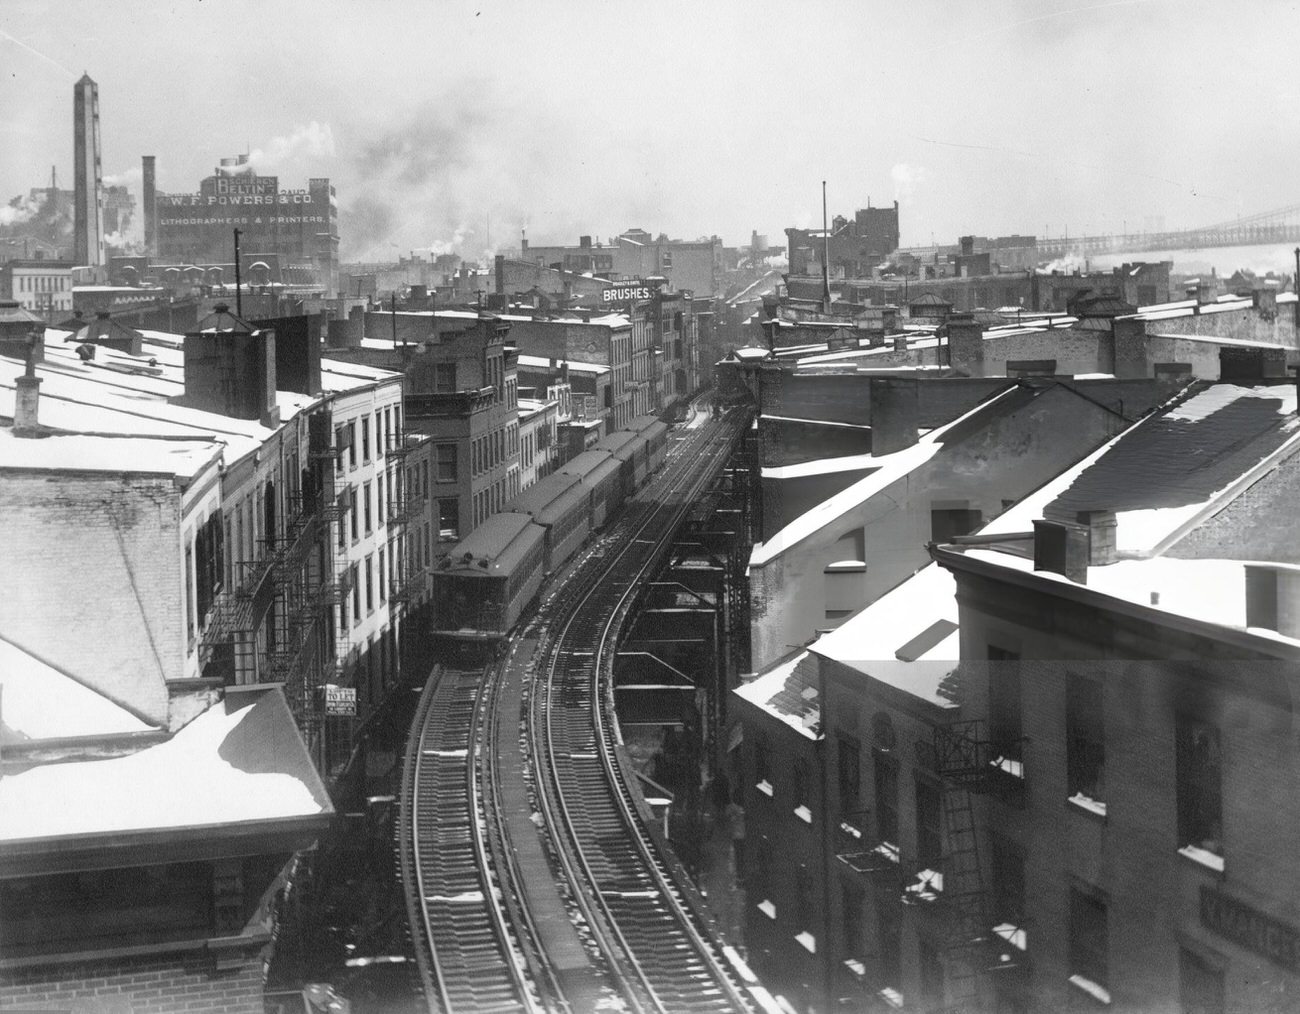 Downtown Section Of The Elevated Railroad In The Bronx, 1895.